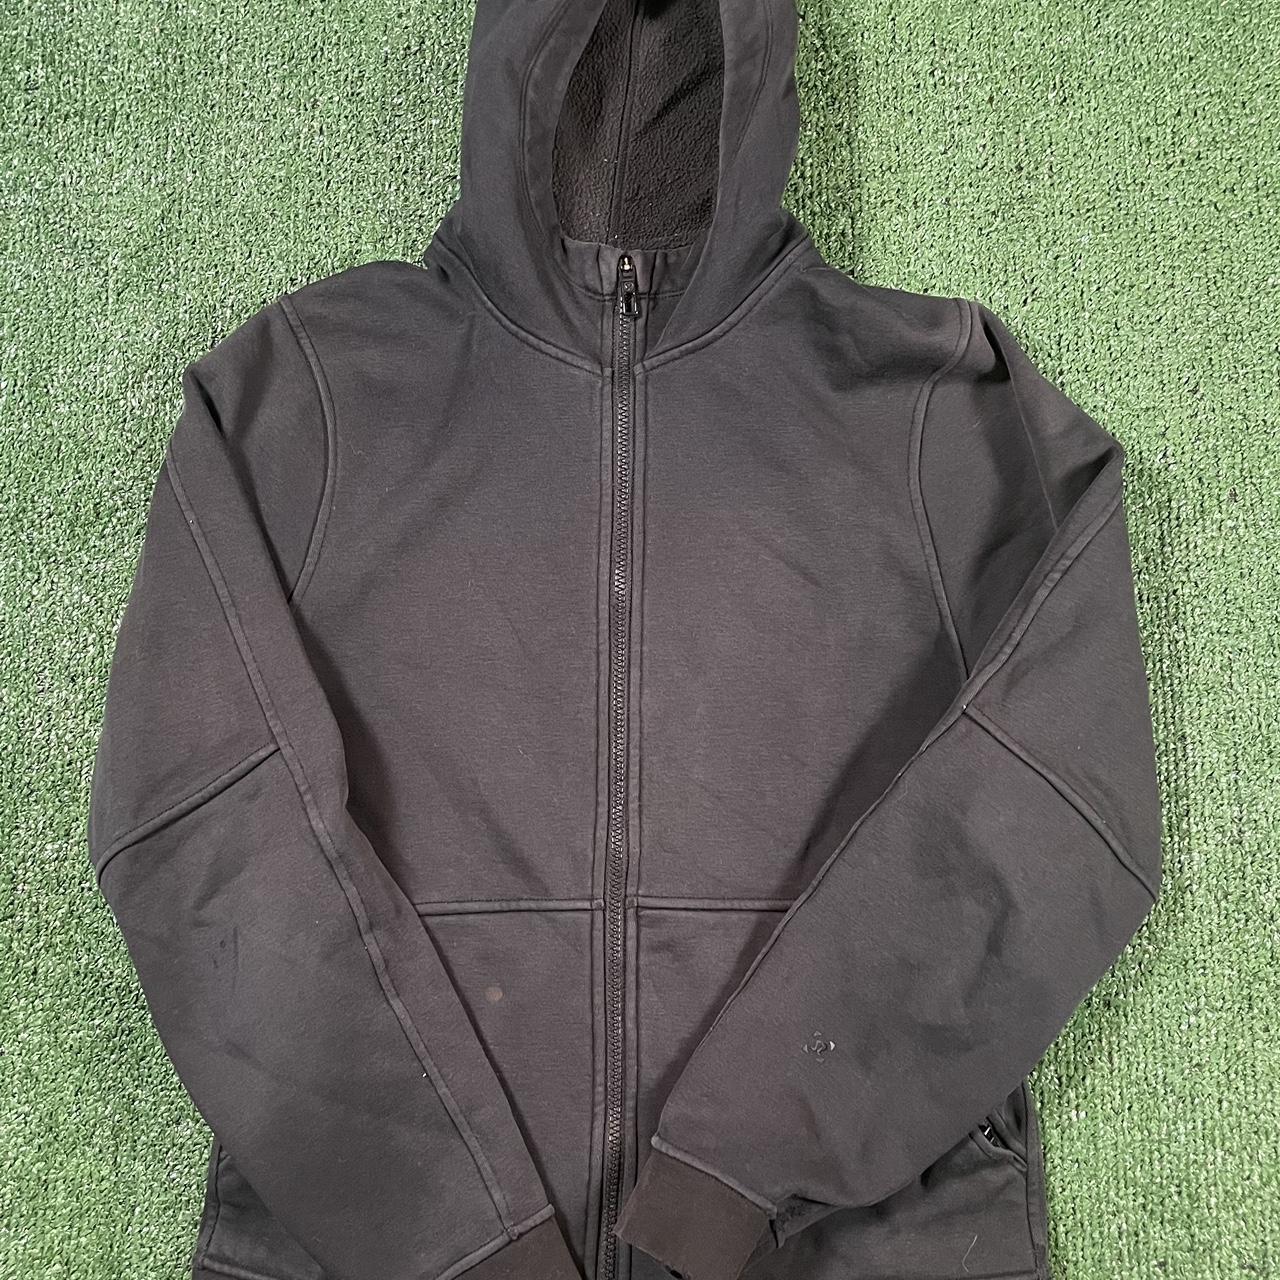 LULULEMON size small zip up hoodie. Small stain on... - Depop